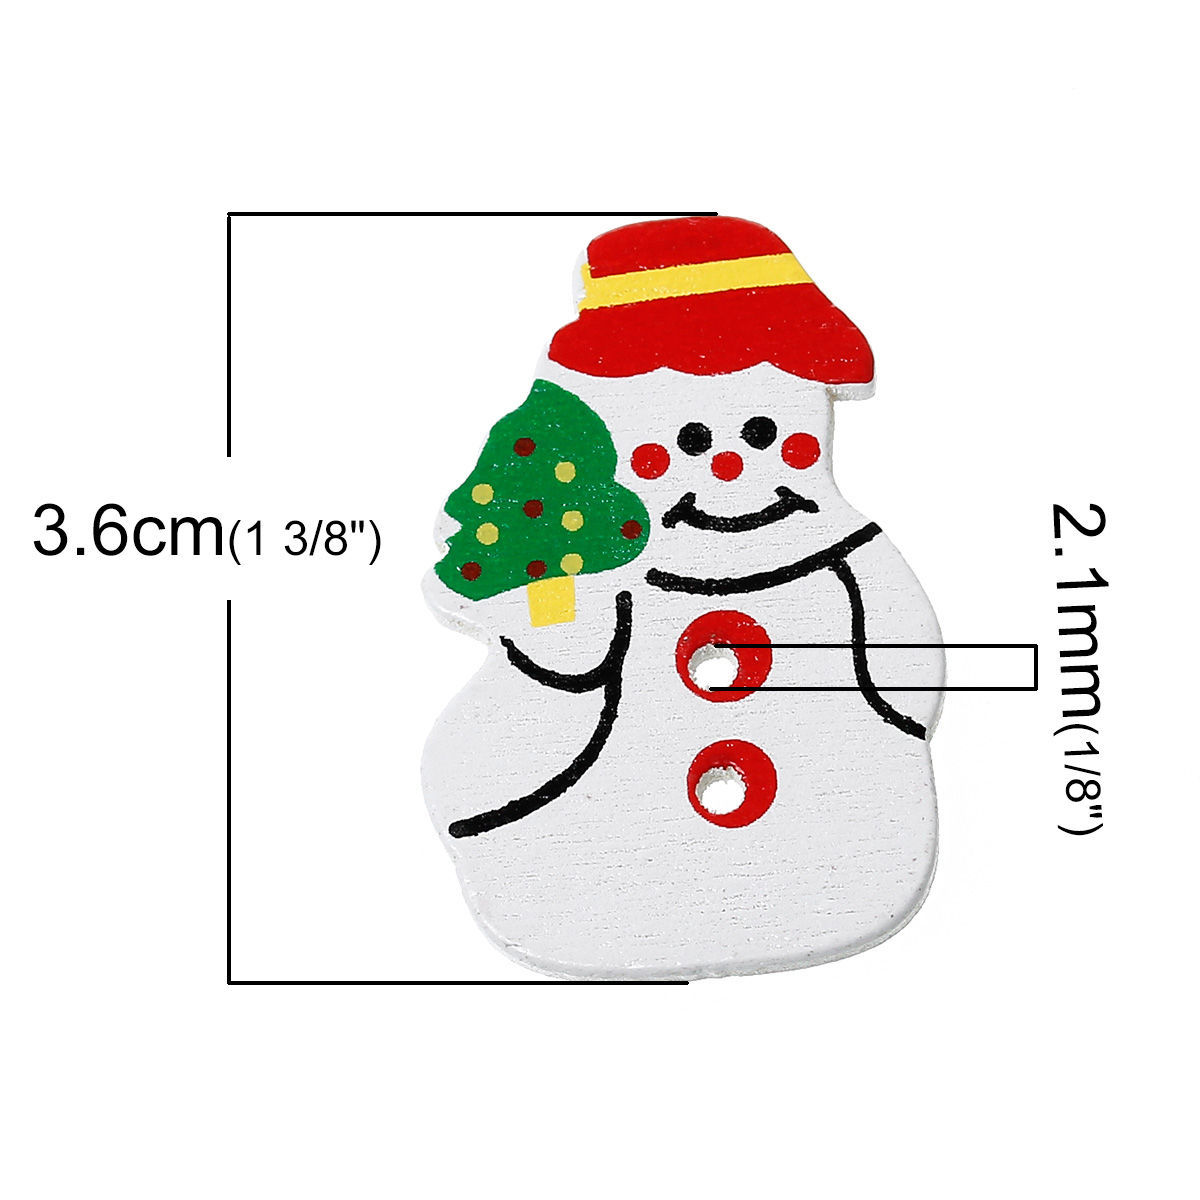 Picture of Wood Sewing Buttons Scrapbooking 2 Holes Christmas Snowman White 36mm(1 3/8") x 24mm(1"), 5 PCs